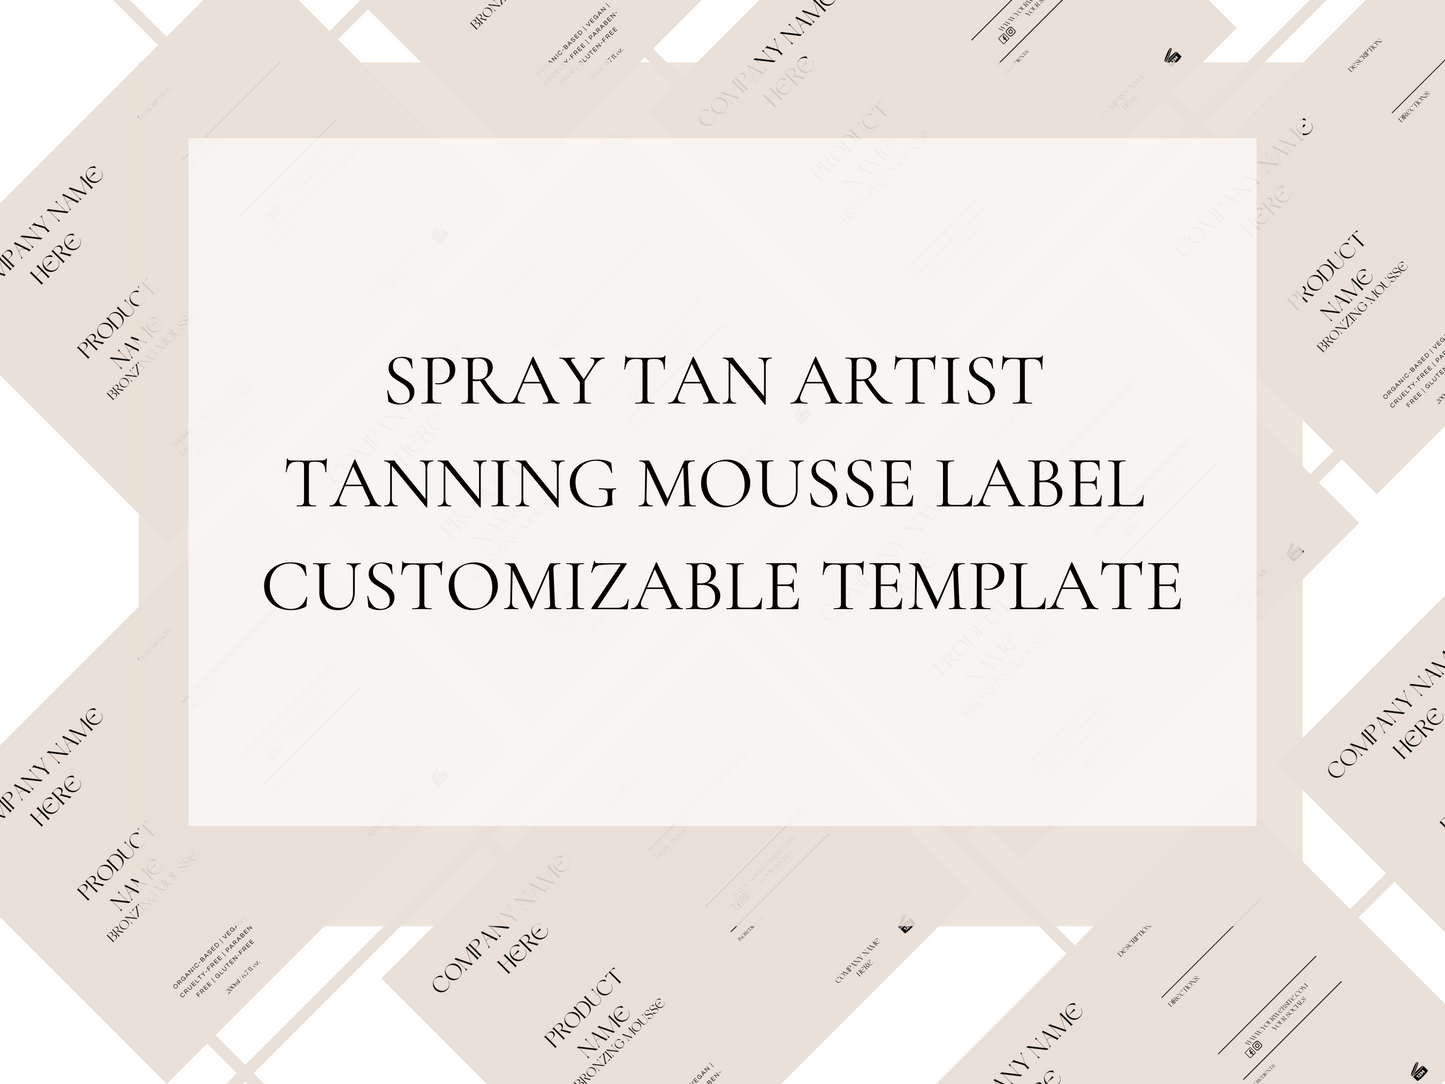 Tanning Mousse Label Template